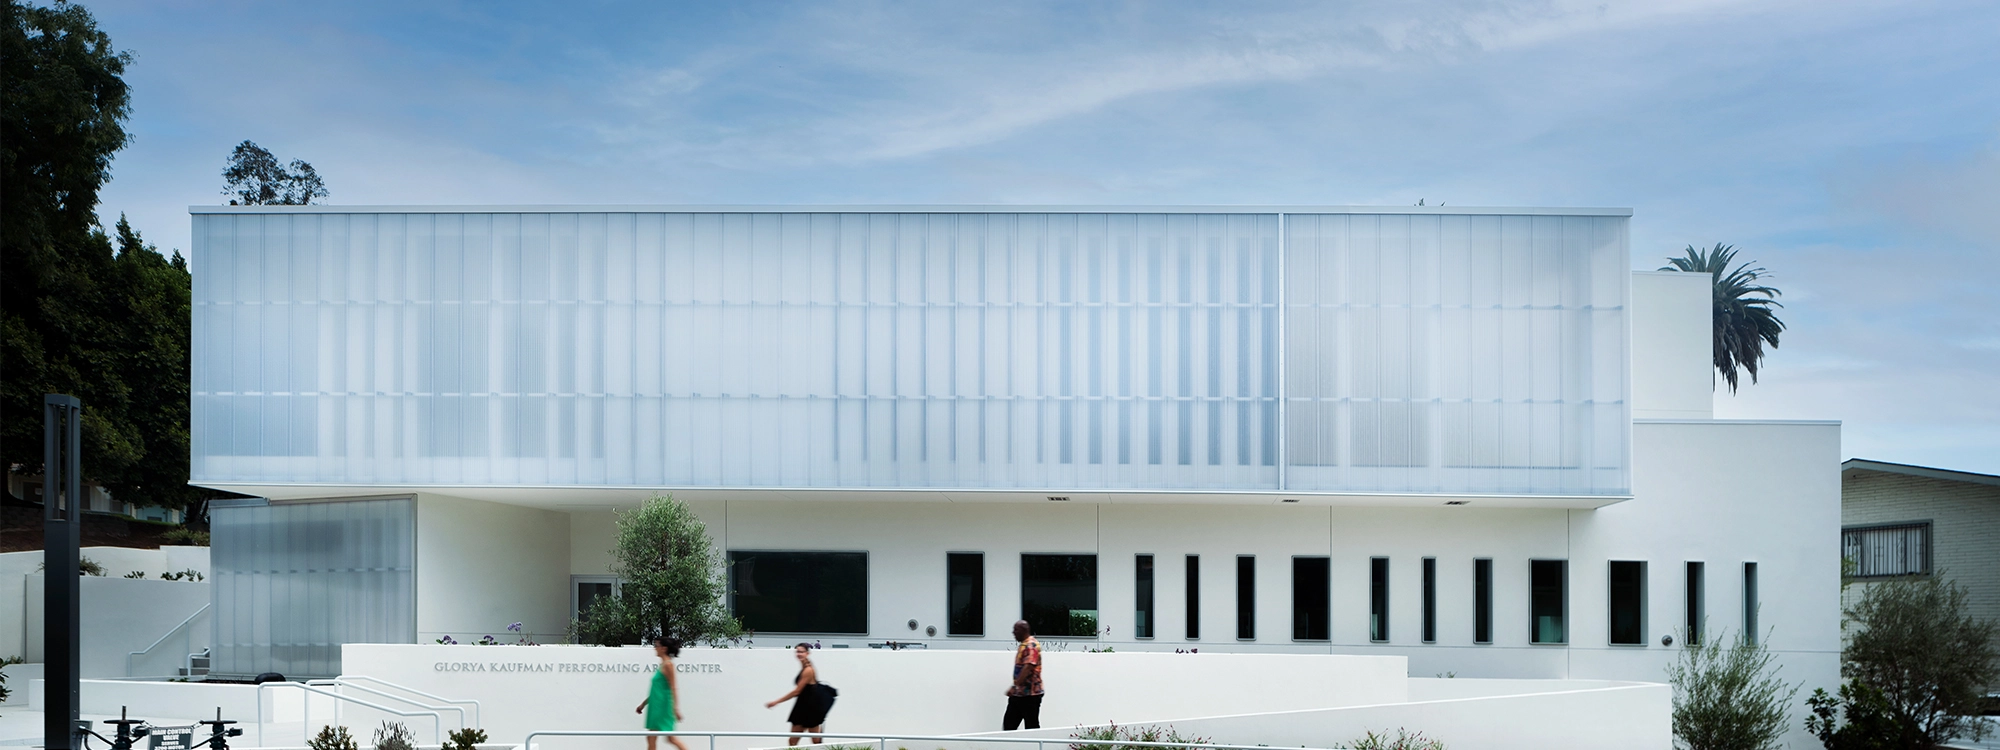 Translucent Walls for Performing Arts Centers  - LIGHTWALL 3440